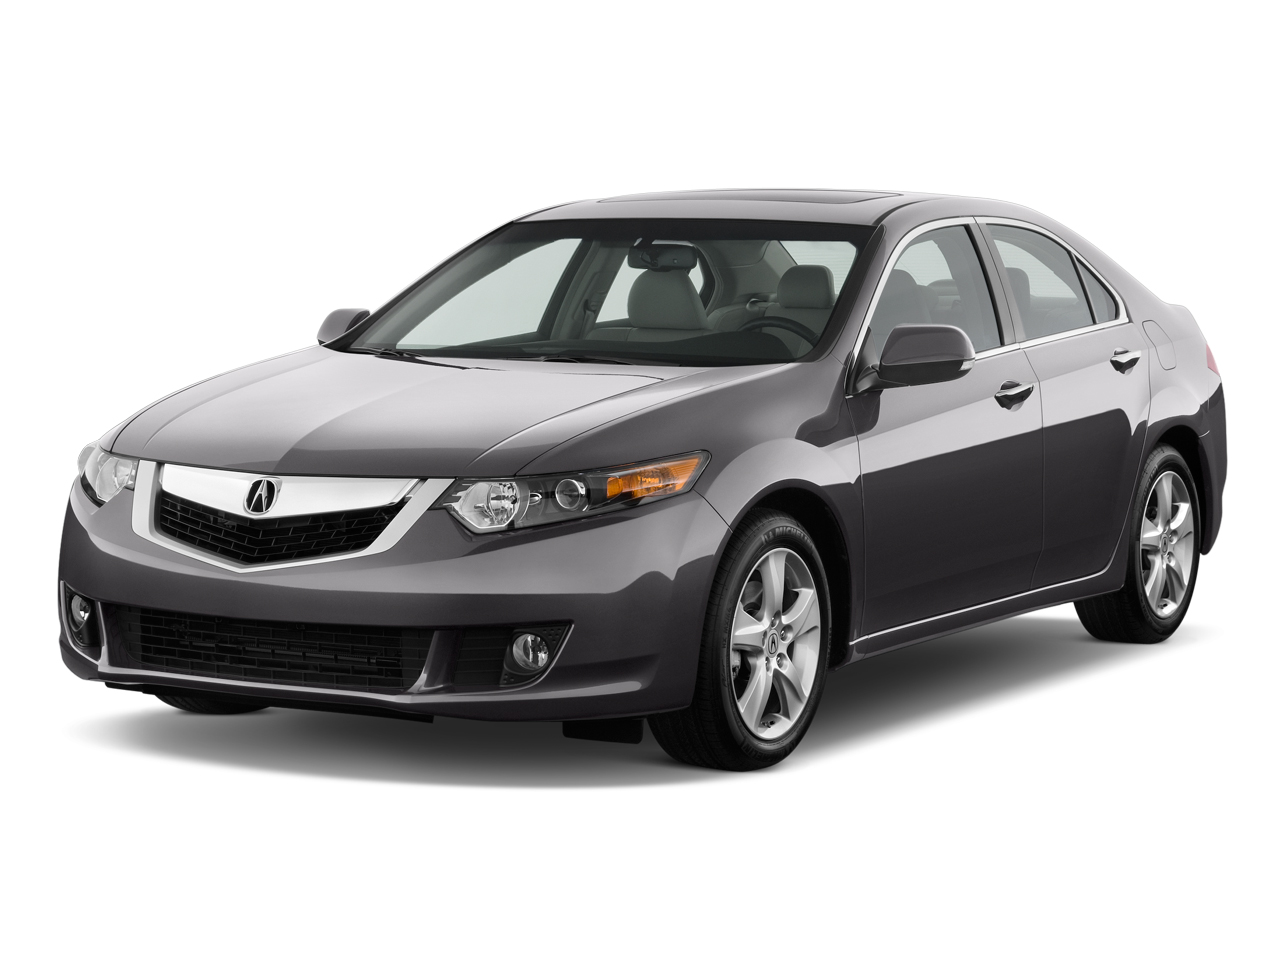 2010 Acura Tsx Review Ratings Specs Prices And Photos